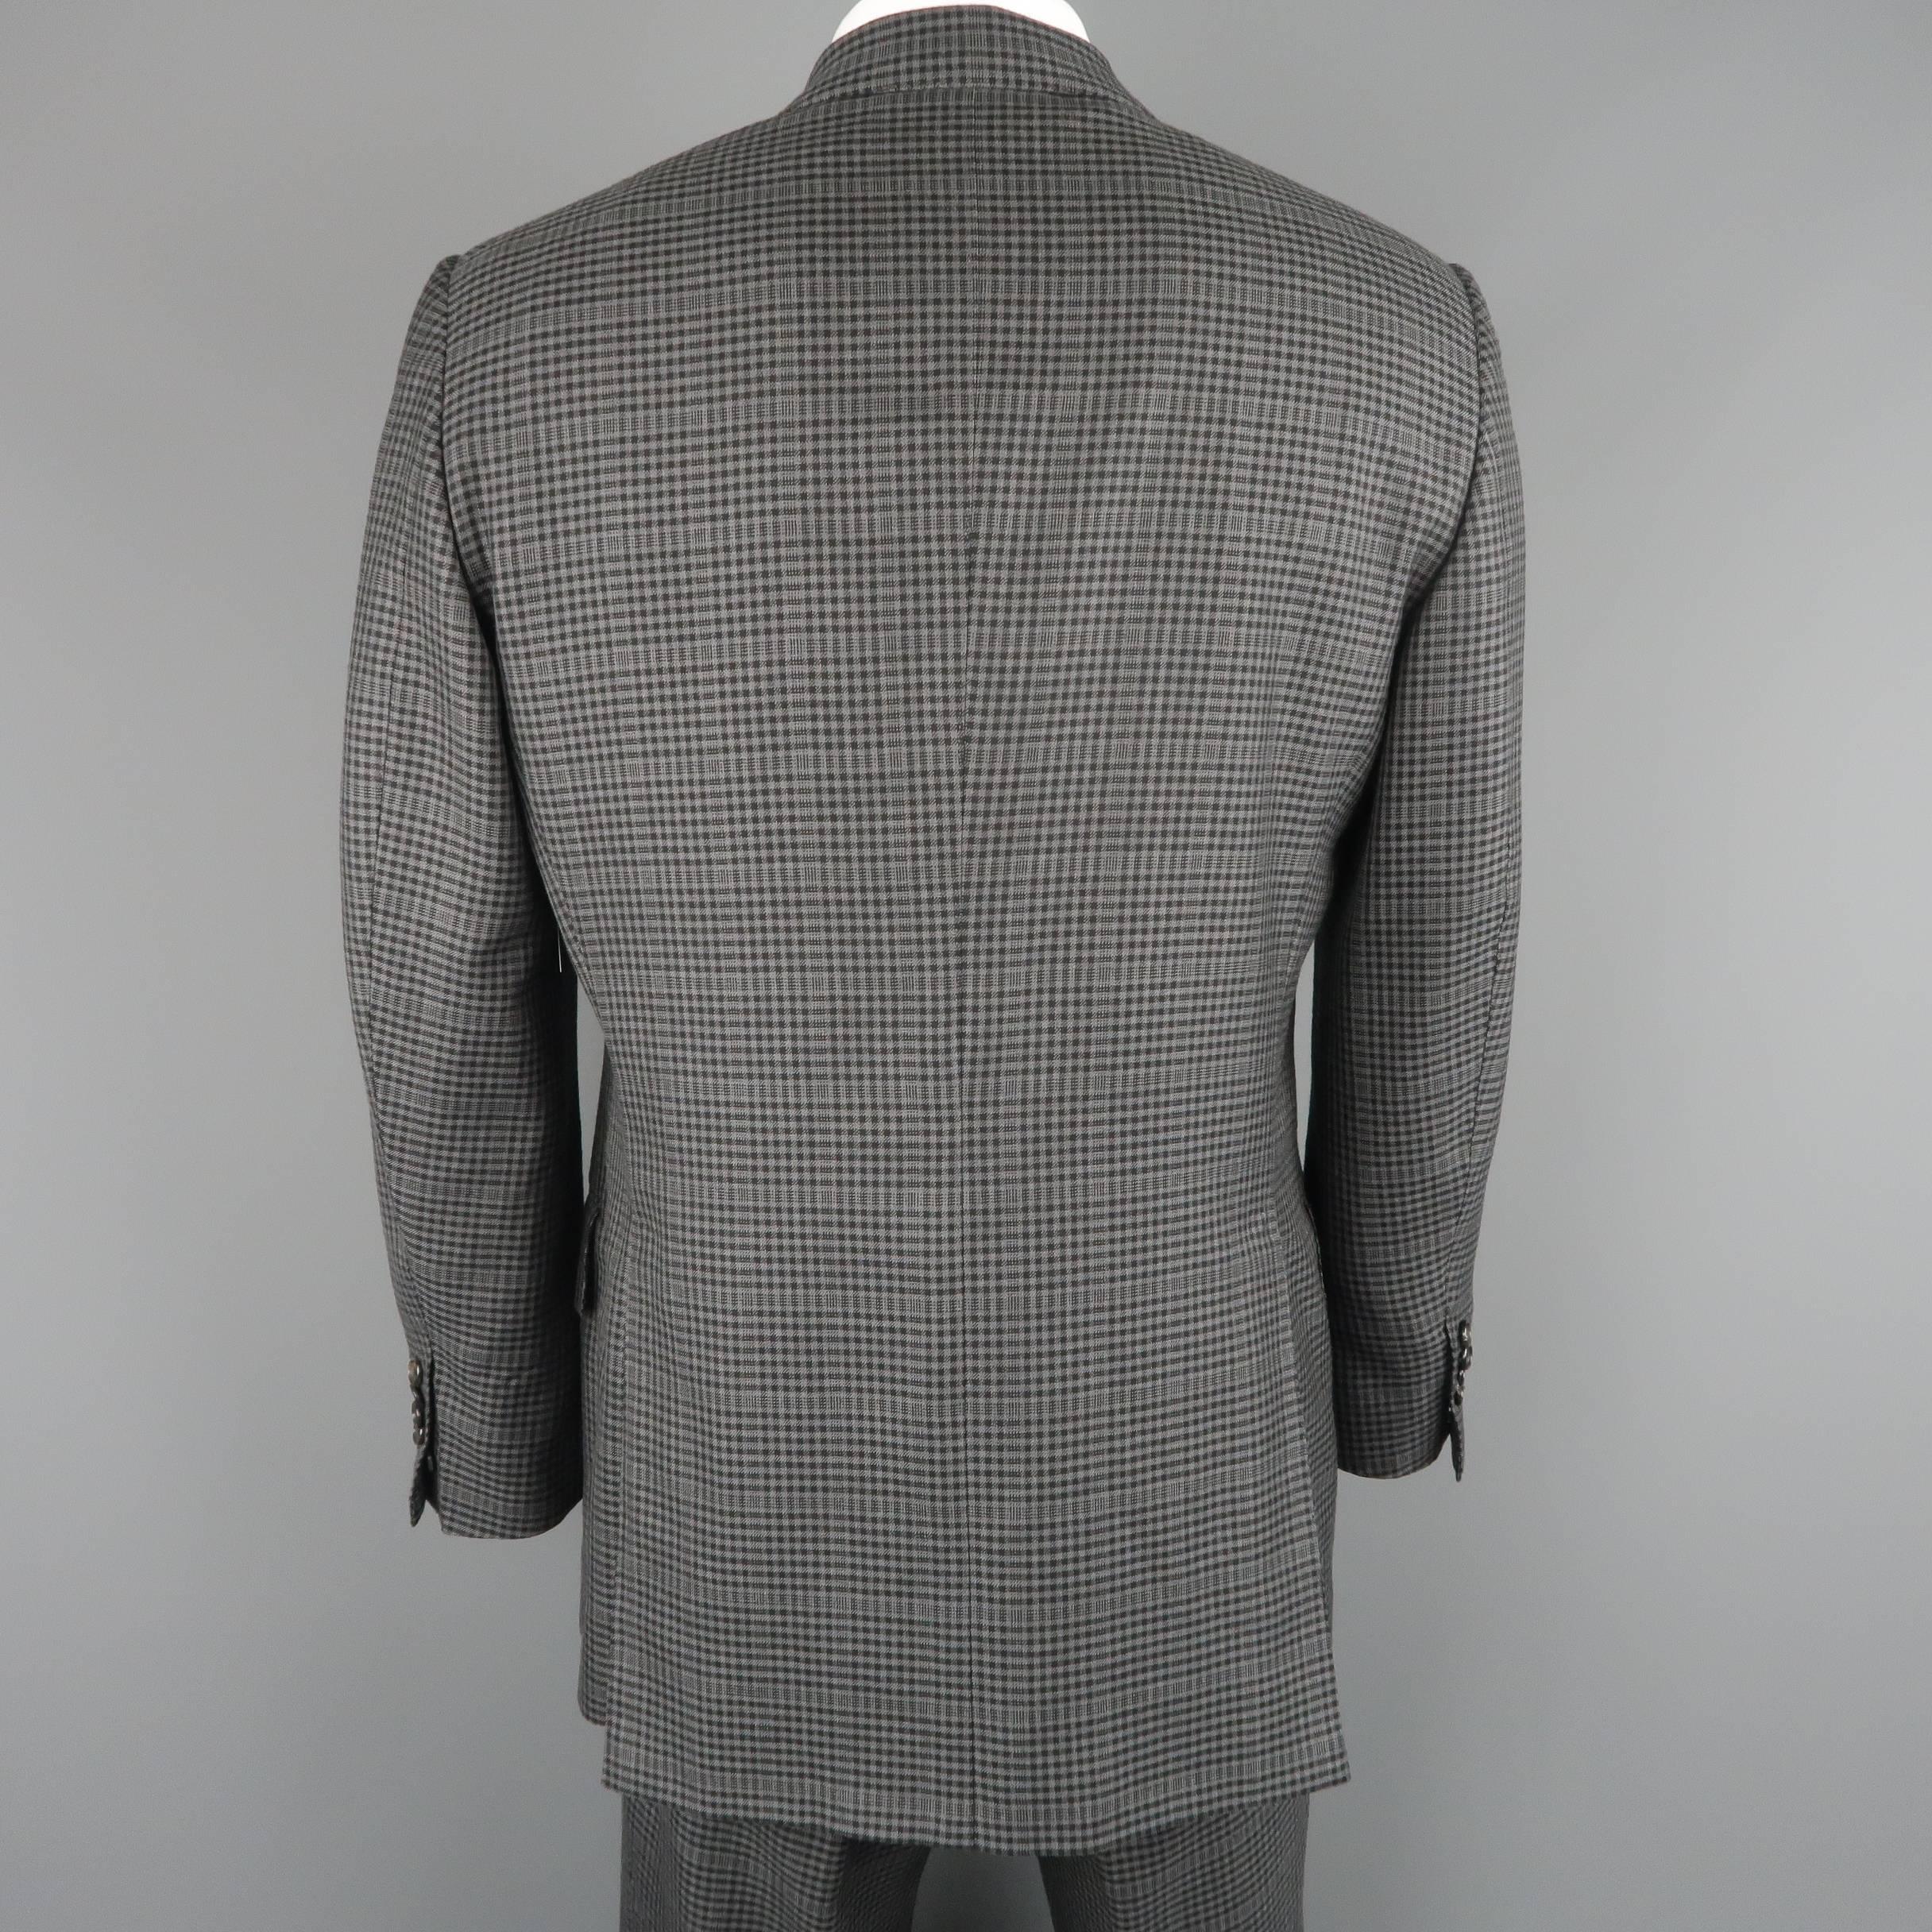 Tom Ford Suit - Two Button, Single Breaded 1